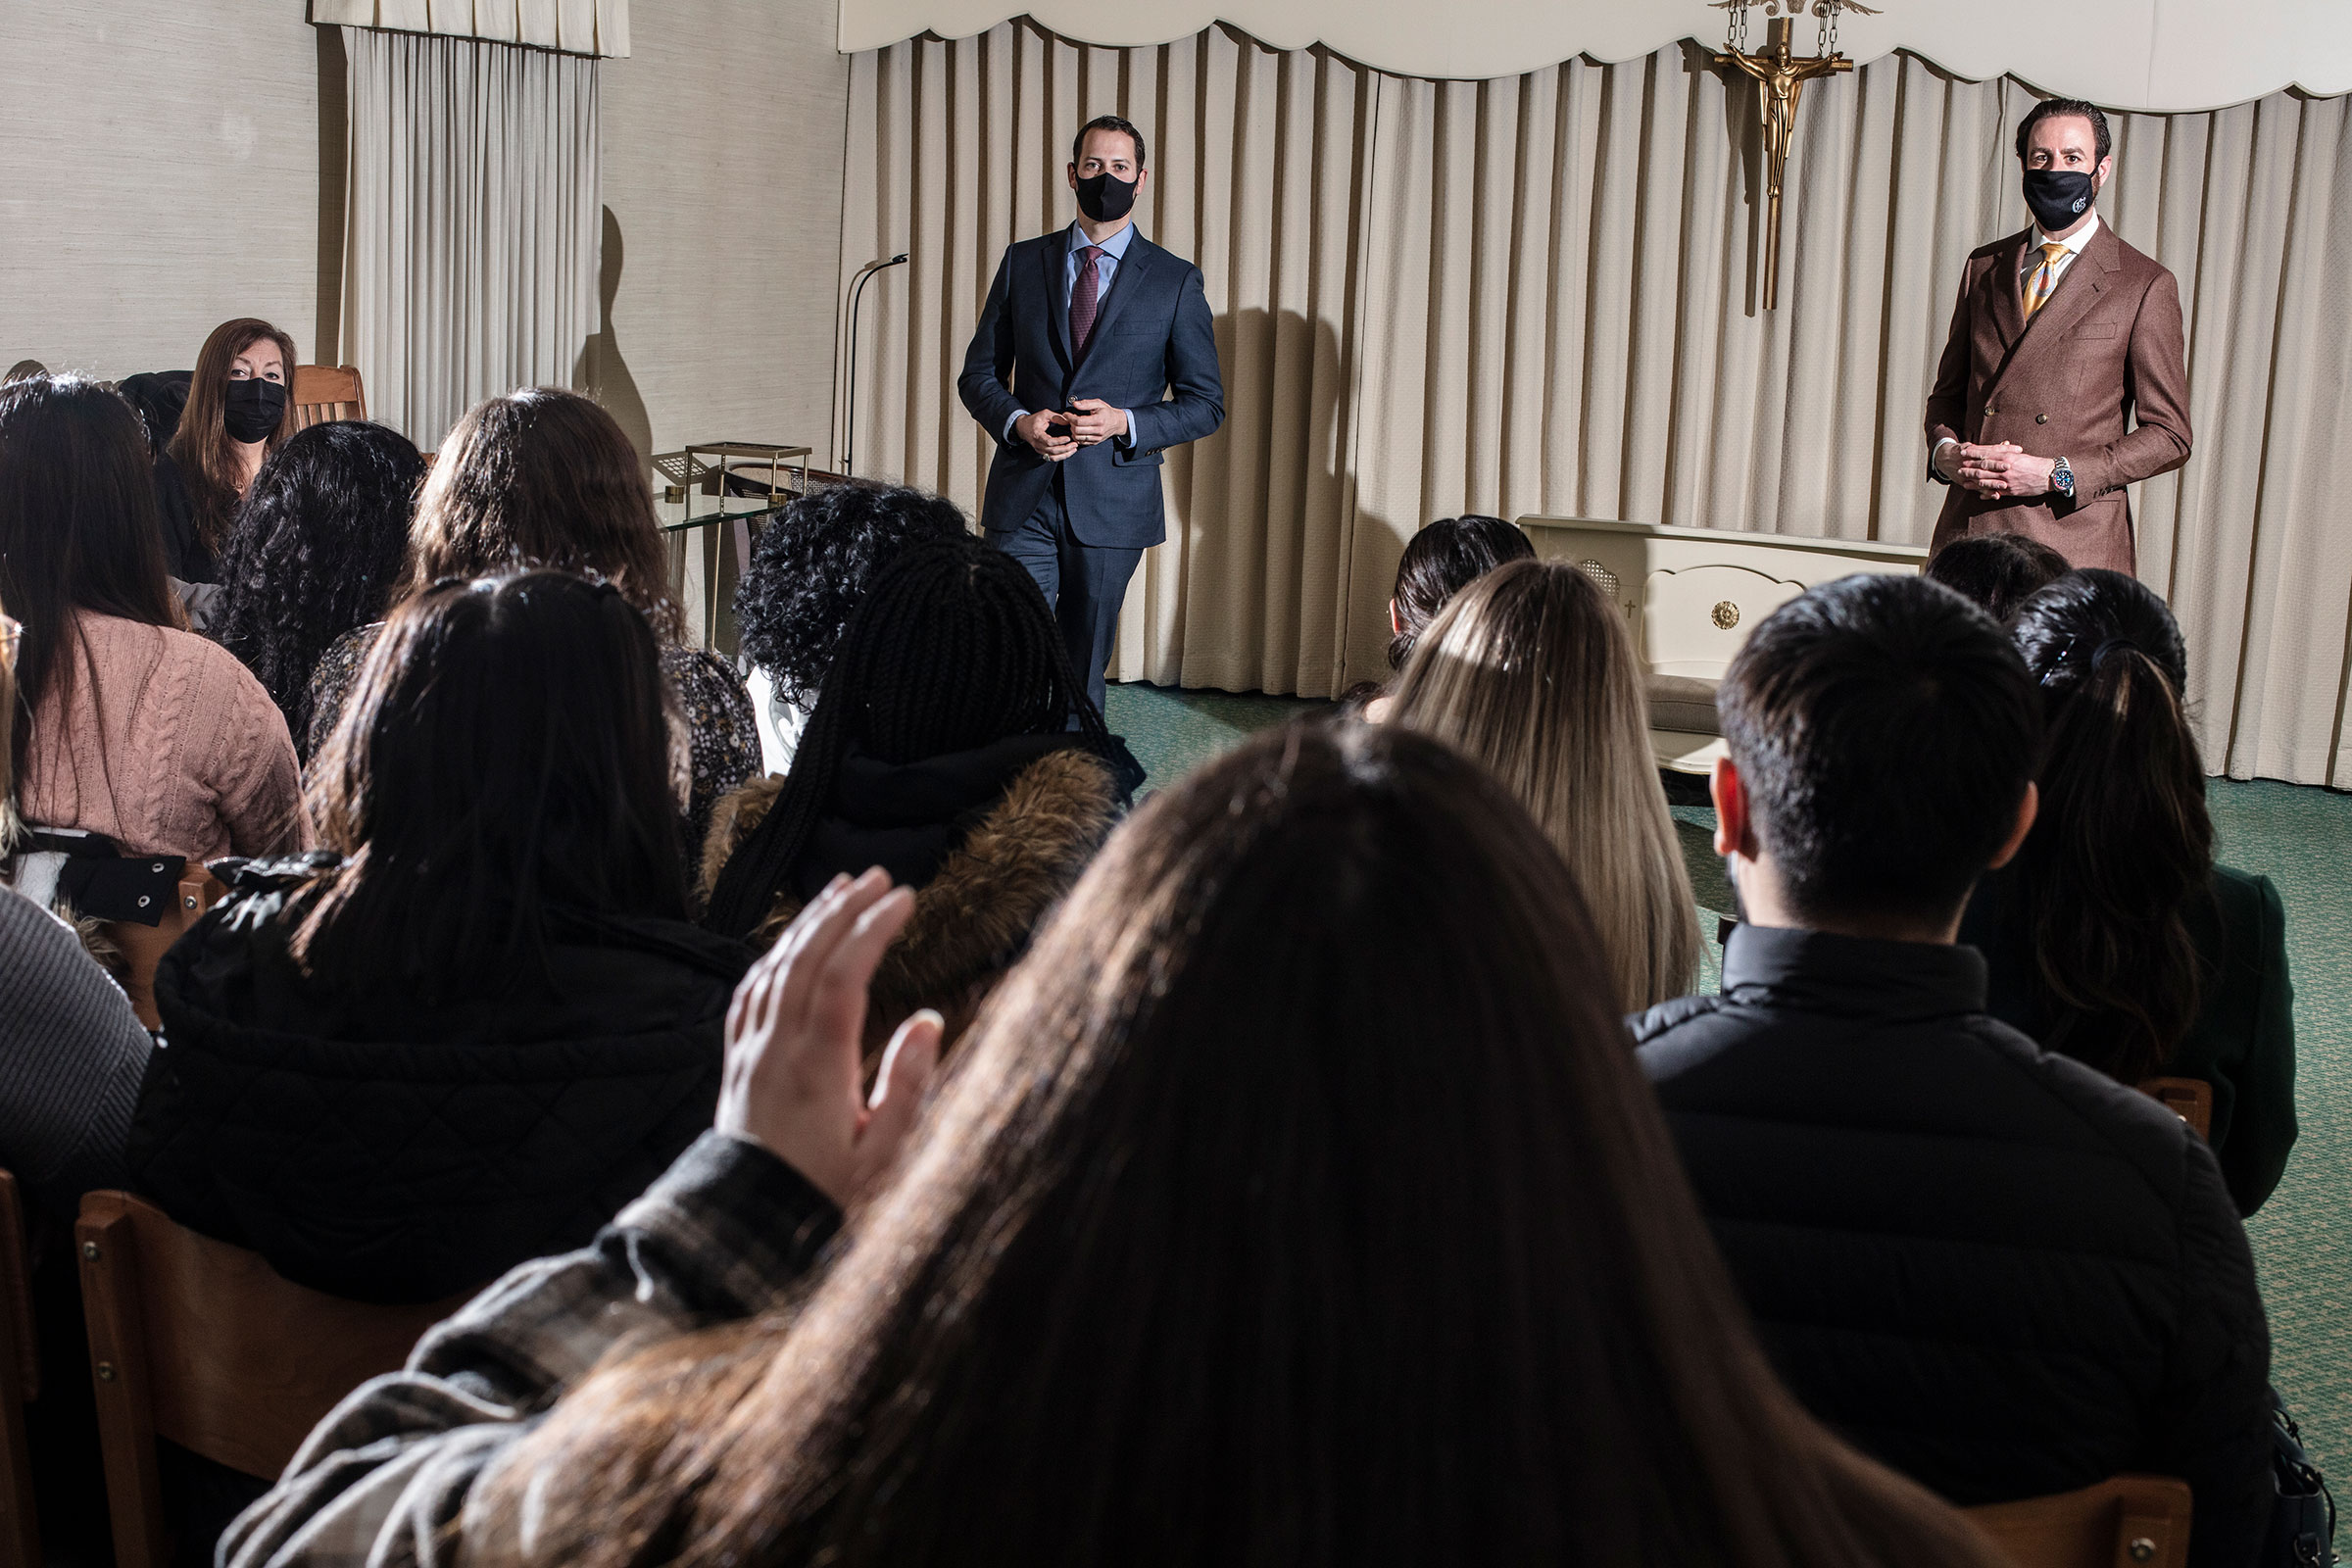 Funeral directors Aaron Tirpack, left, and Frank Galante, right, speak to students during professor Norma Bowe’s Kean University course Death in Perspective at Galante Funeral Home in Union, N.J., on Feb. 2, 2022 (Bryan Anselm for TIME)